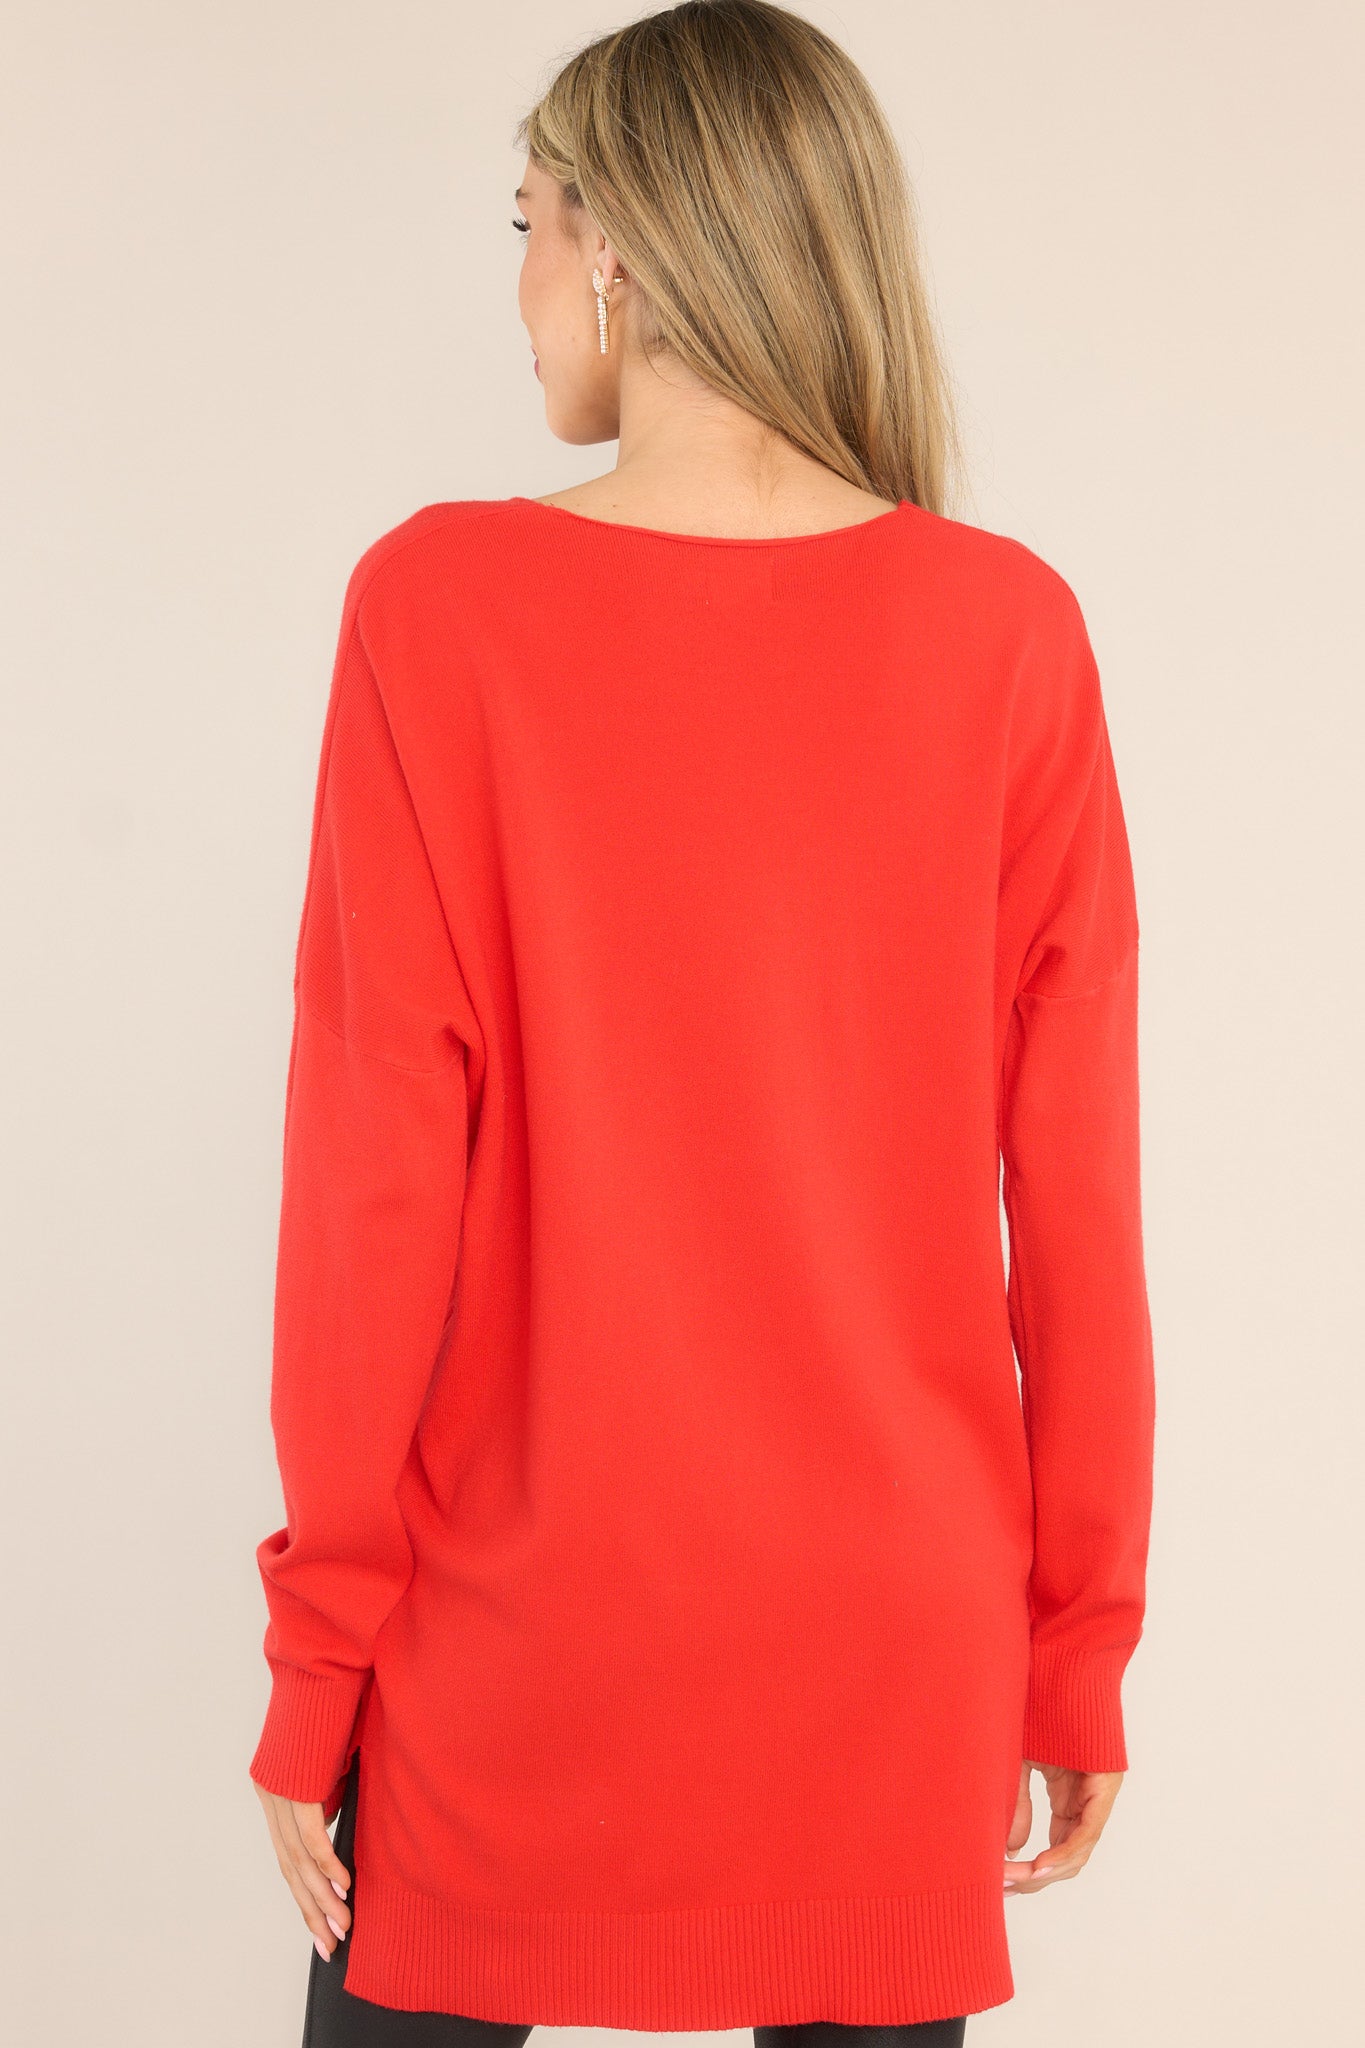 Back view of this sweater that features a v-neckline, center seam down the front, a high low hem, slits on the sides, and ribbed detailing on the cuffs and hem.